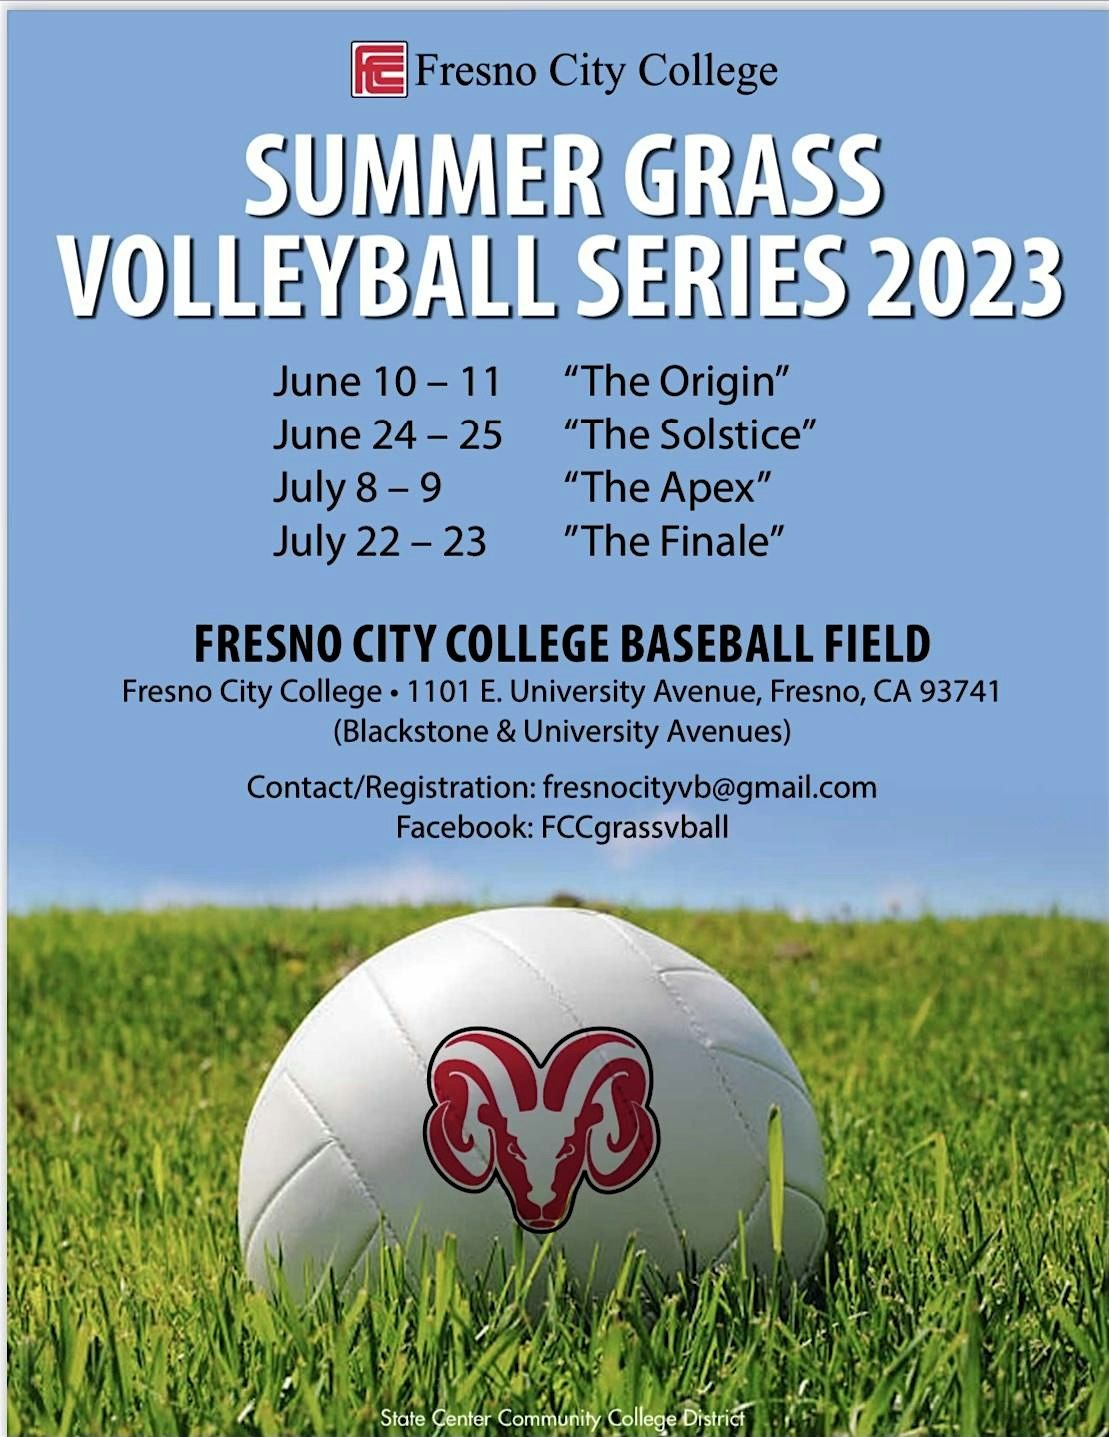 Summer Grass Volleyball Series - "The Finale" (Co-Ed)